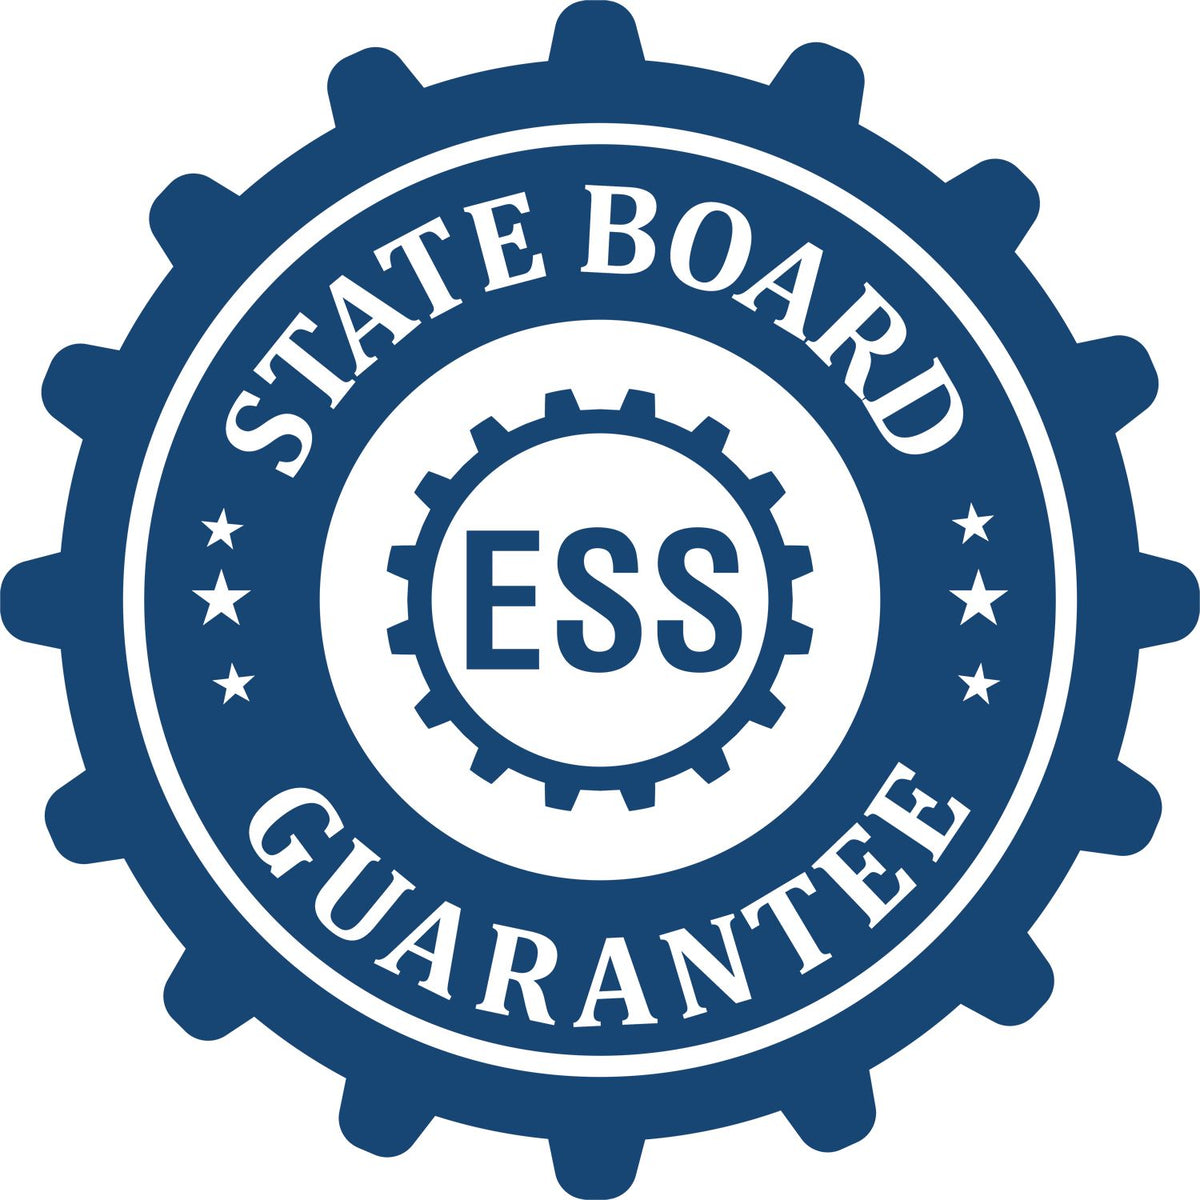 An emblem in a gear shape illustrating a state board guarantee for the State of Utah Long Reach Architectural Embossing Seal product.